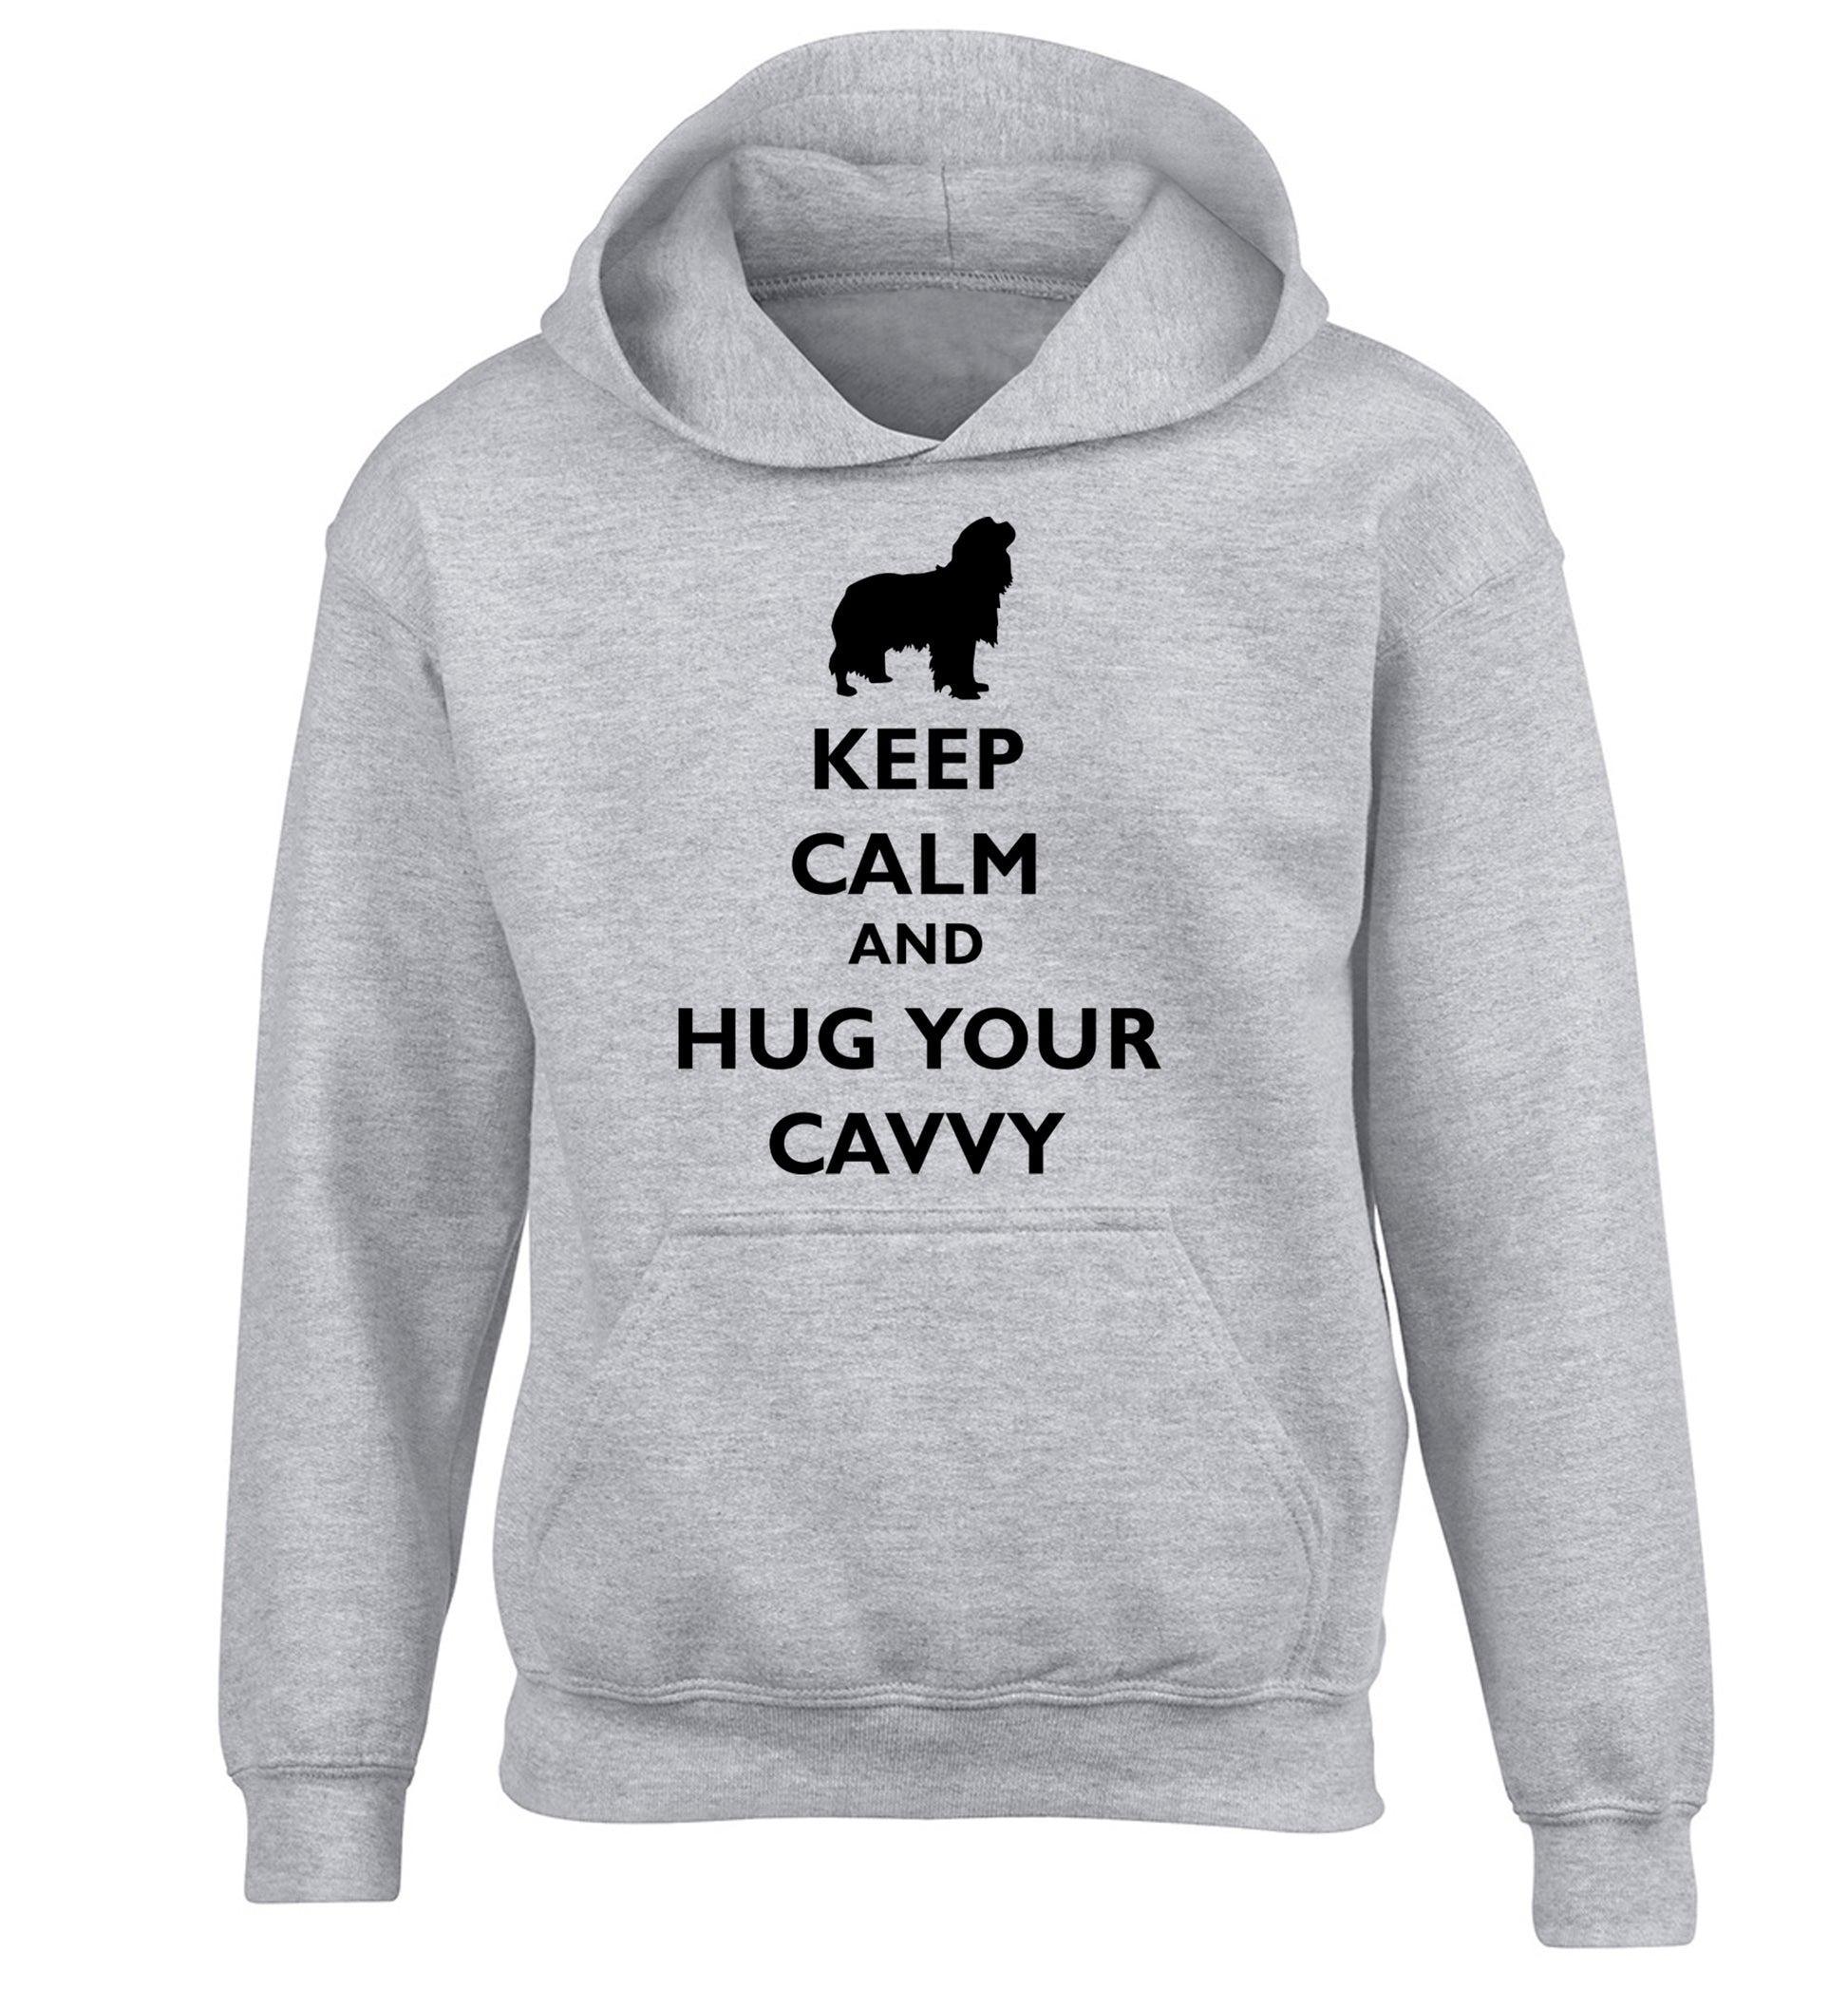 Keep calm and hug your cavvy children's grey hoodie 12-13 Years